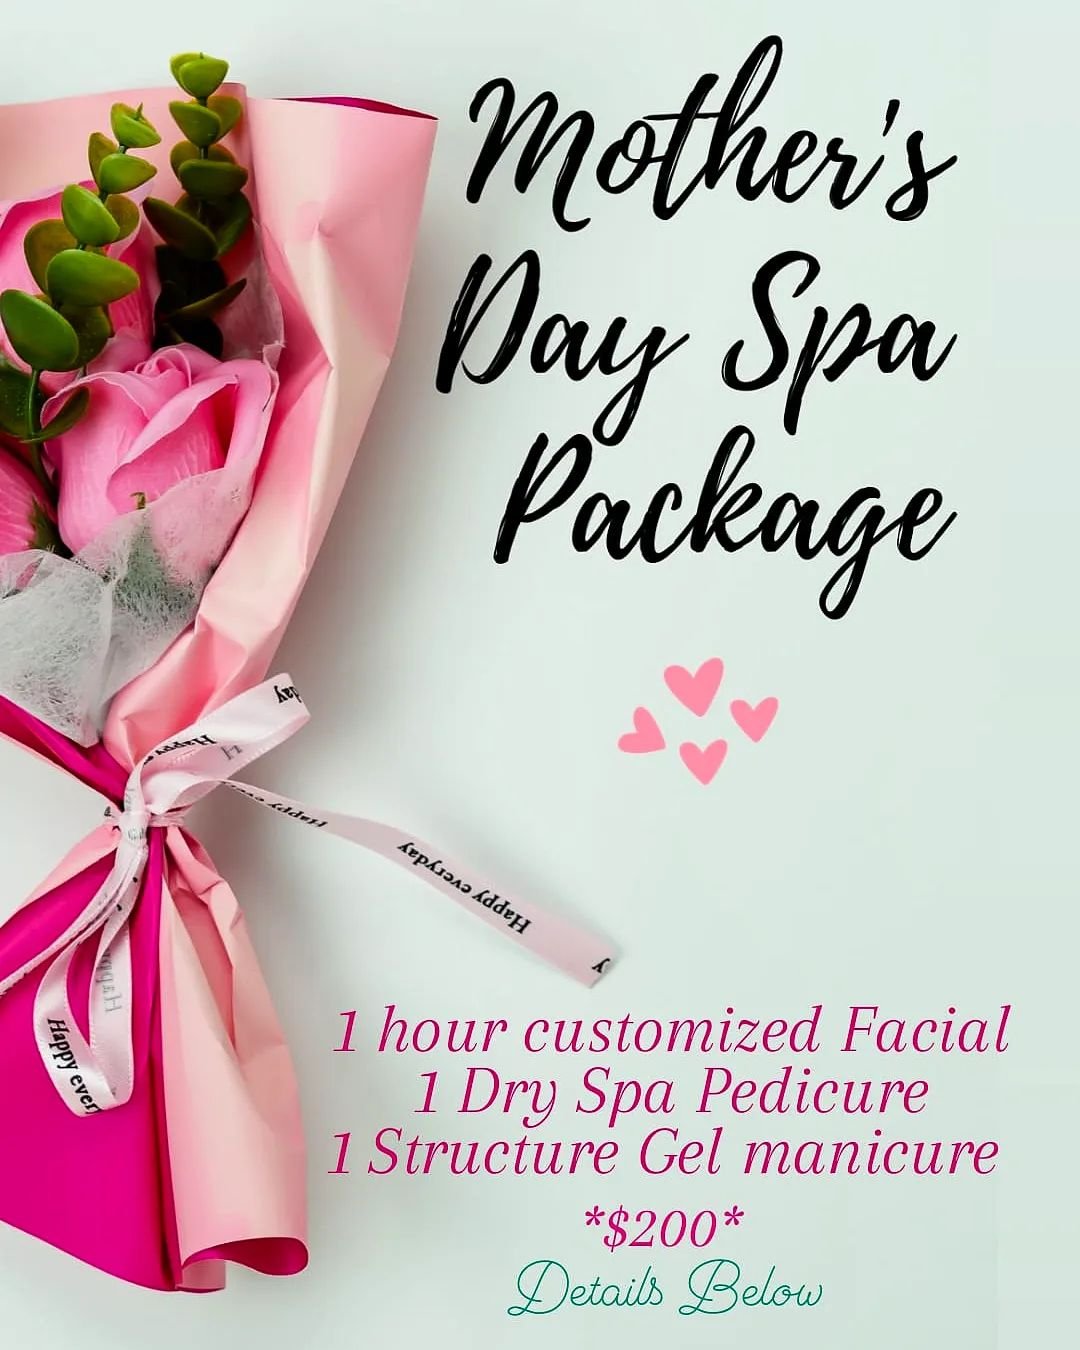 Stumped on how to treat your Mom this year??

*ADONIA MOTHER'S DAY PACKAGE*

1 hour customized Facial with @shelbysesthetics

1 Dry Spa Pedicure &amp; Structured Gel Manicure with @getnailed_byangie 

$200 for the package
($40 savings)

In order to p